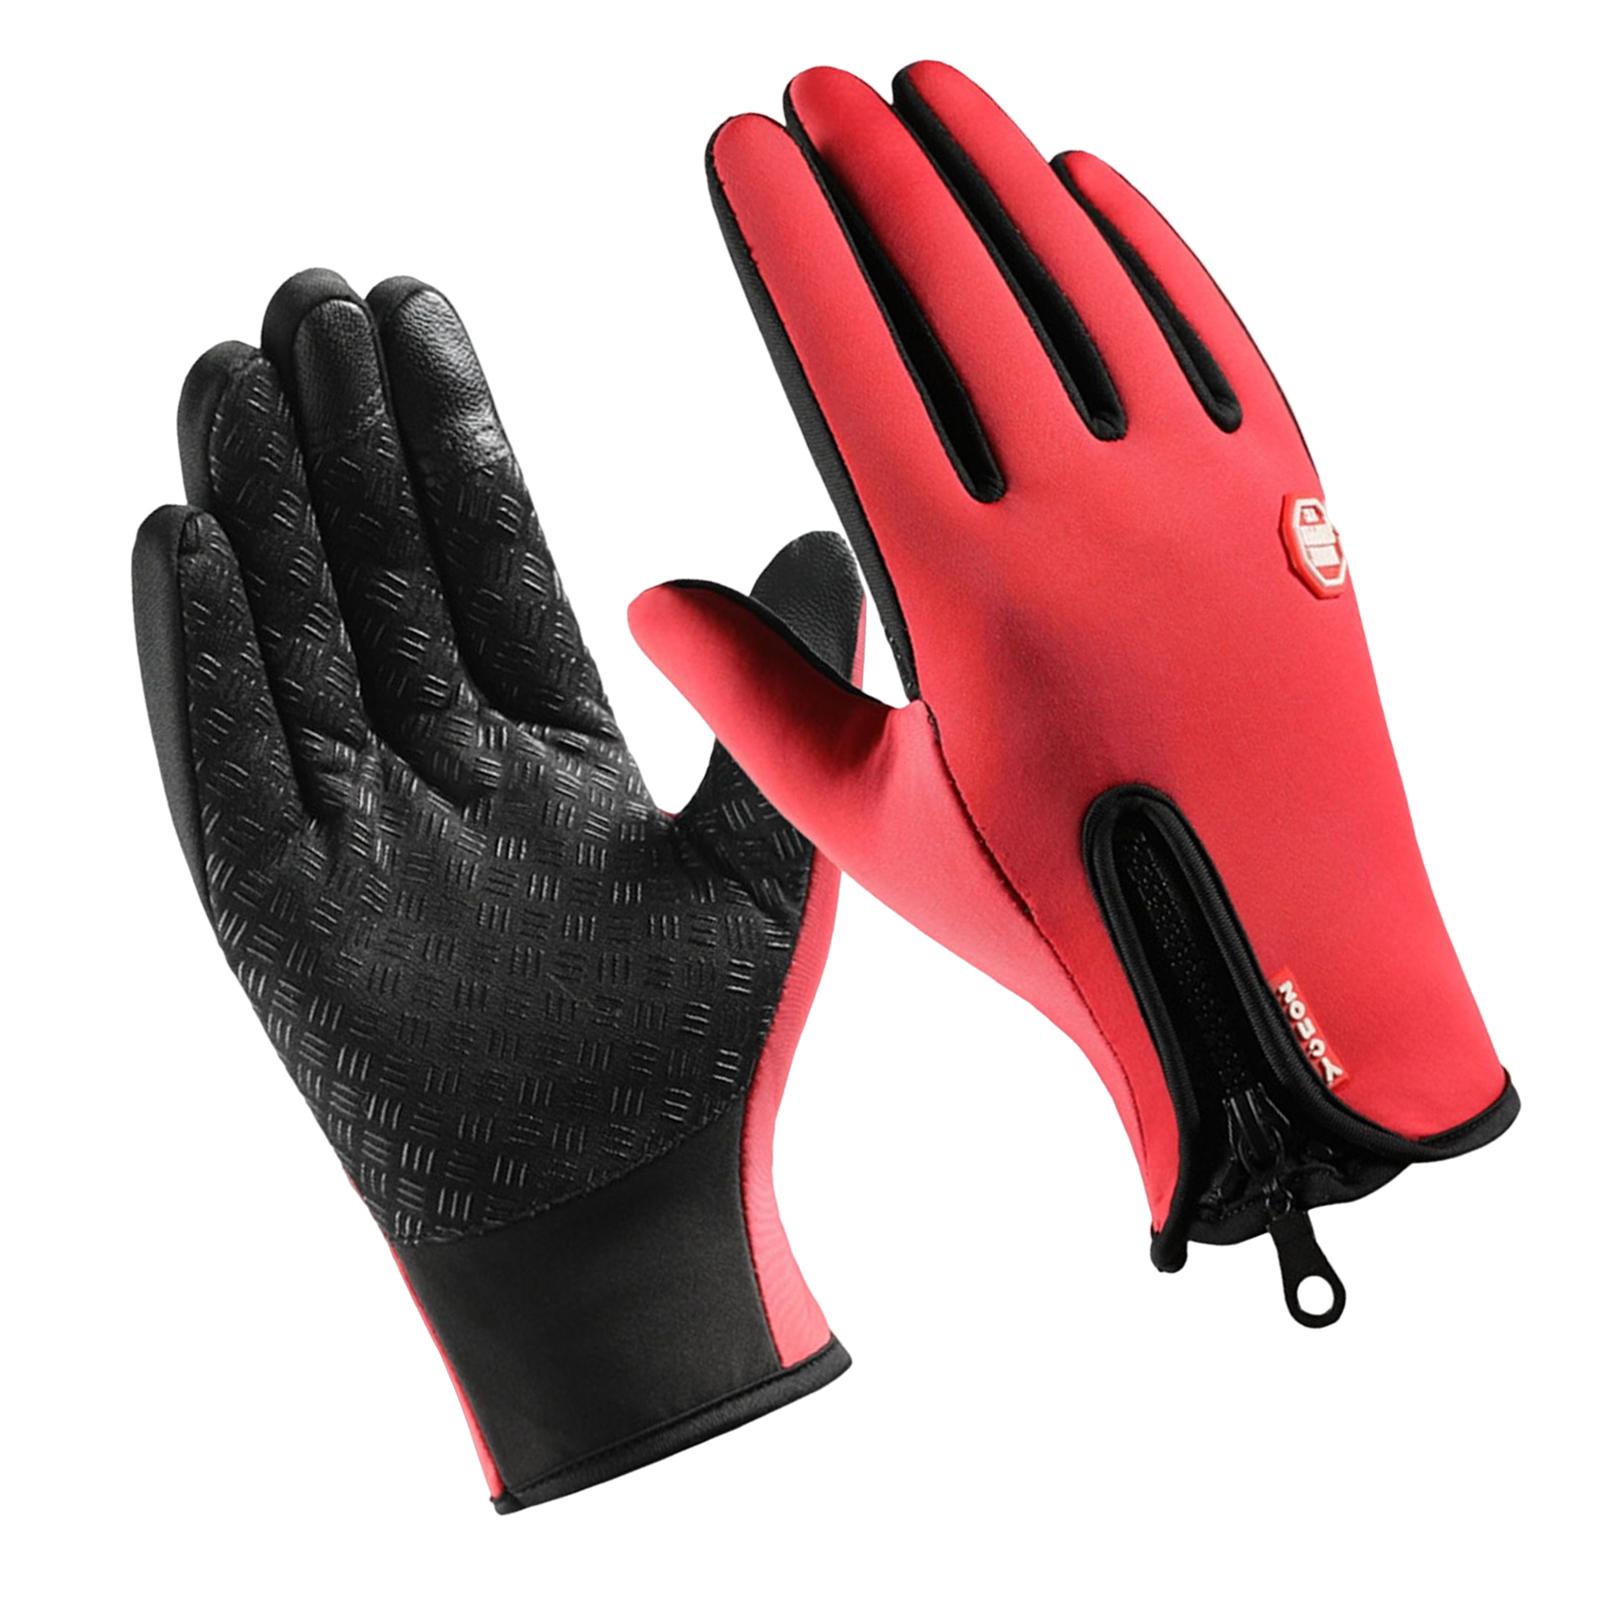 Winter Gloves Nonslip Thermal Gloves for Outdoor Running Sports Motorcycle Red M